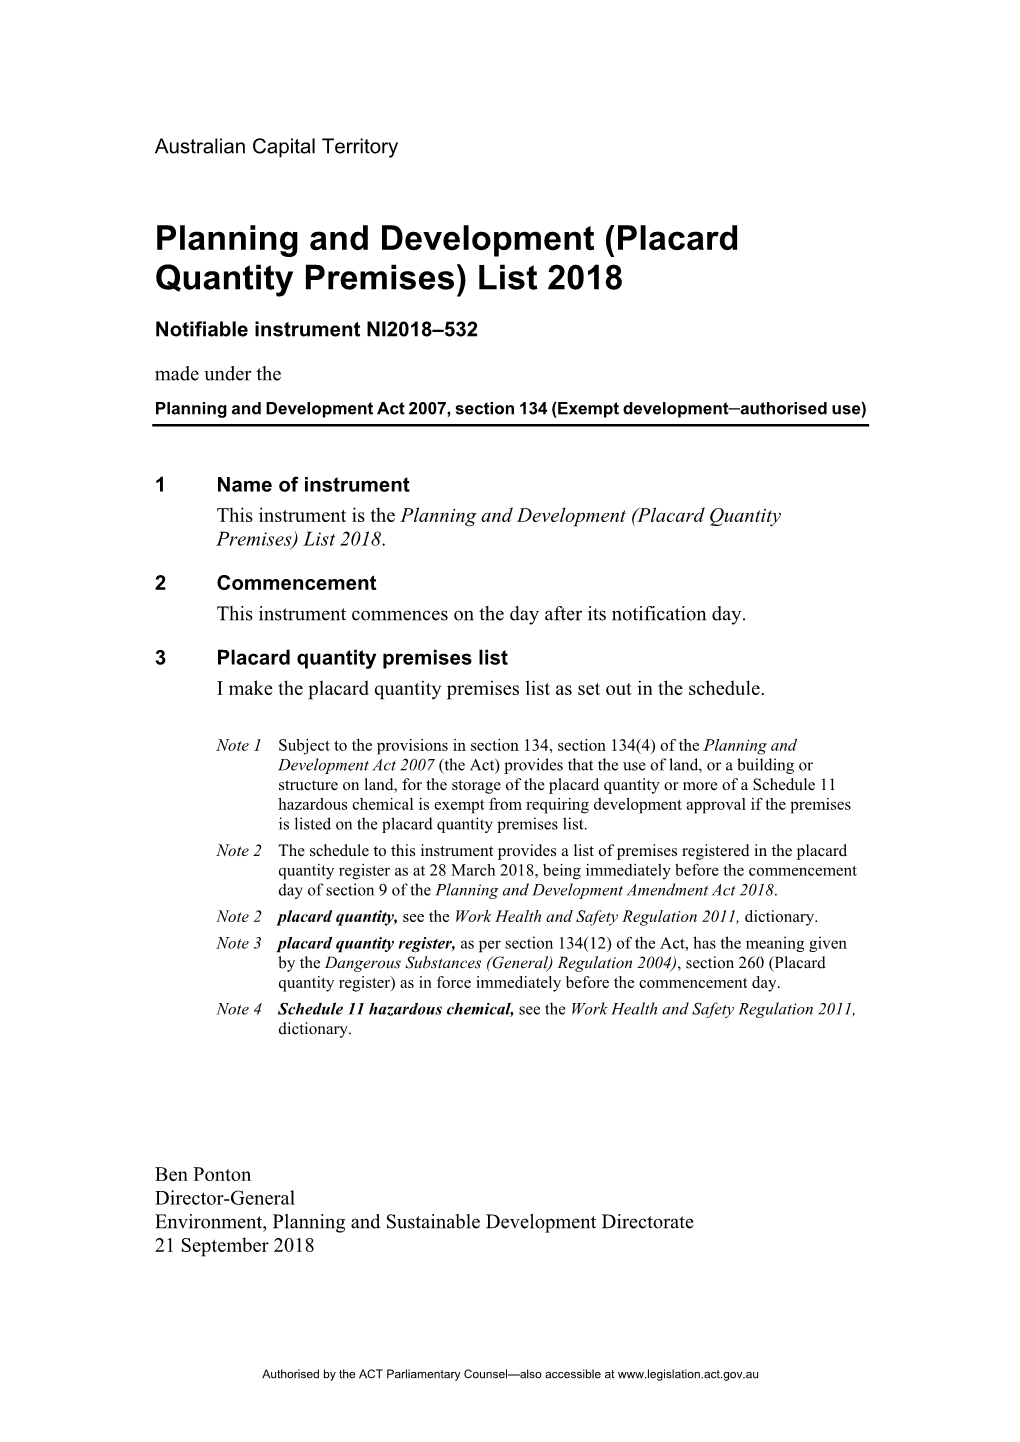 Notifiable Instrument NI2018–532 Made Under the Planning and Development Act 2007, Section 134 (Exempt Development–Authorised Use)